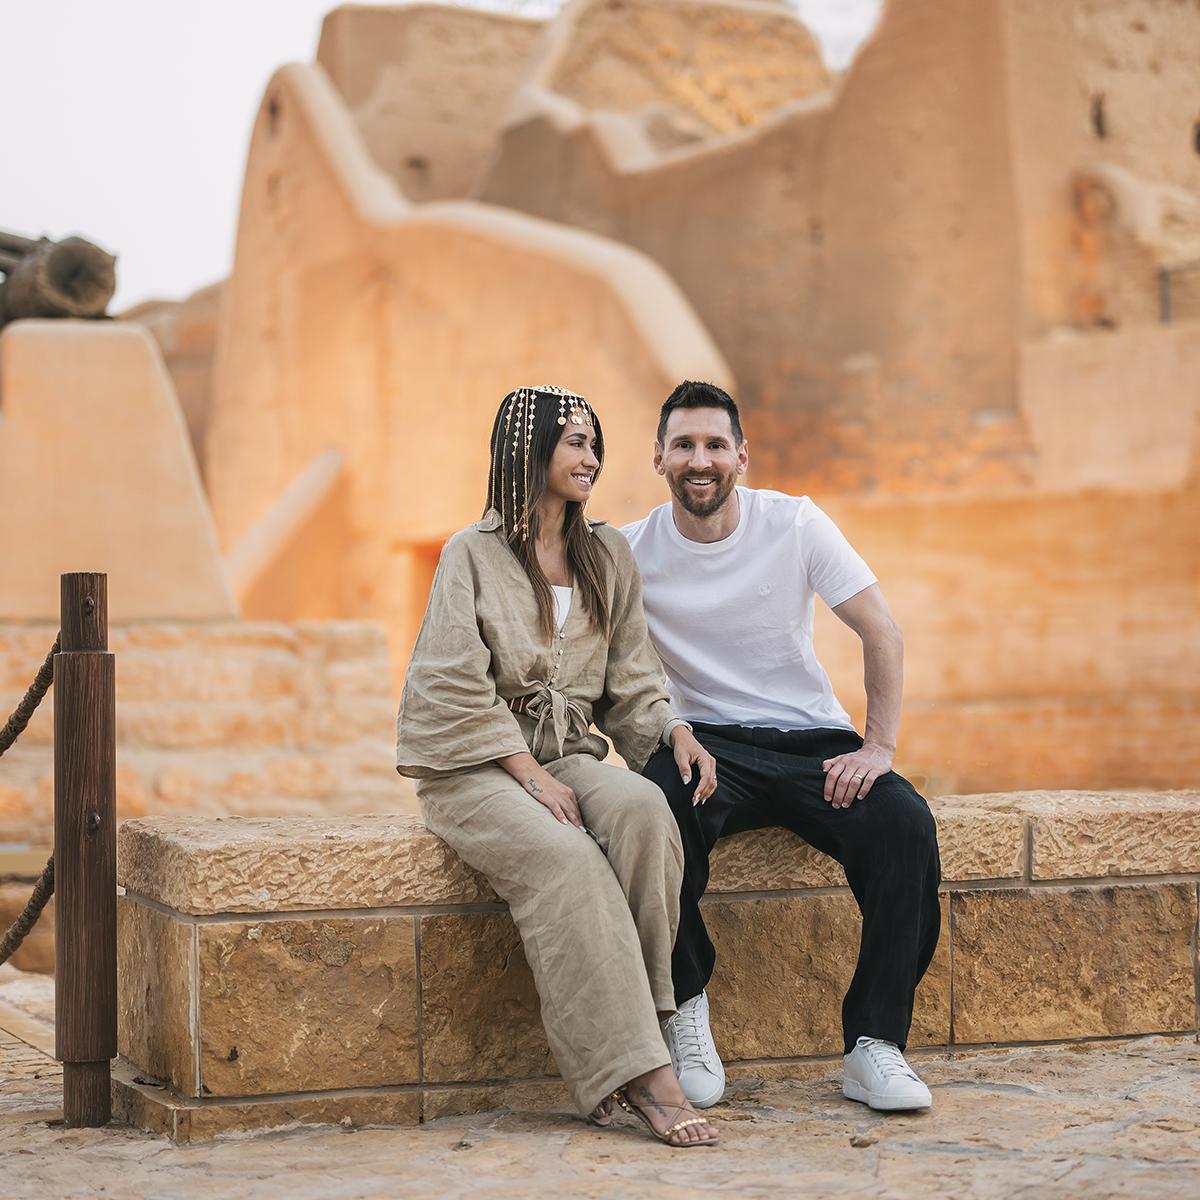 Fooballer Lionel Messi, who is a tourism ambassador for Saudi Arabia, poses for a promotional shoot with his wife. 